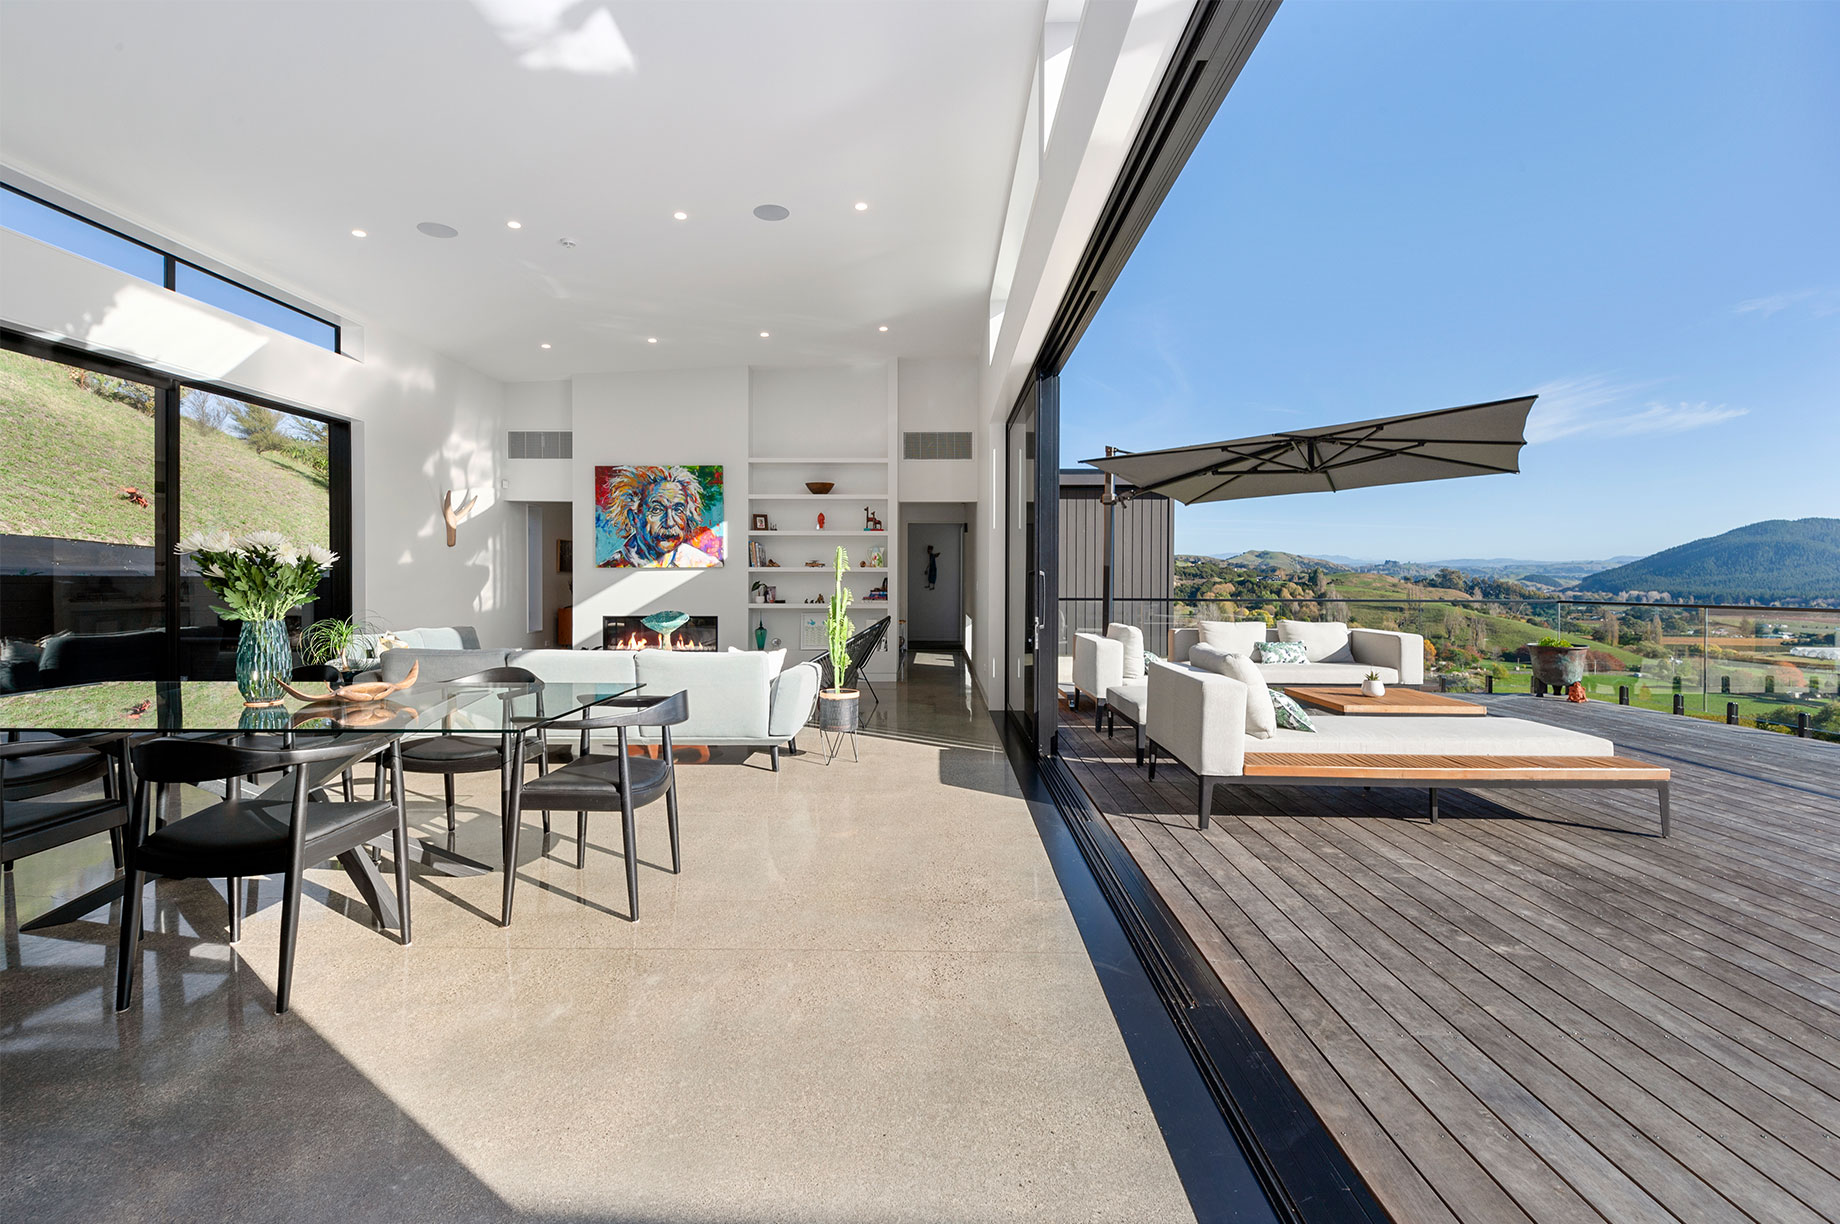 Indoor-outdoor living space with a hill view